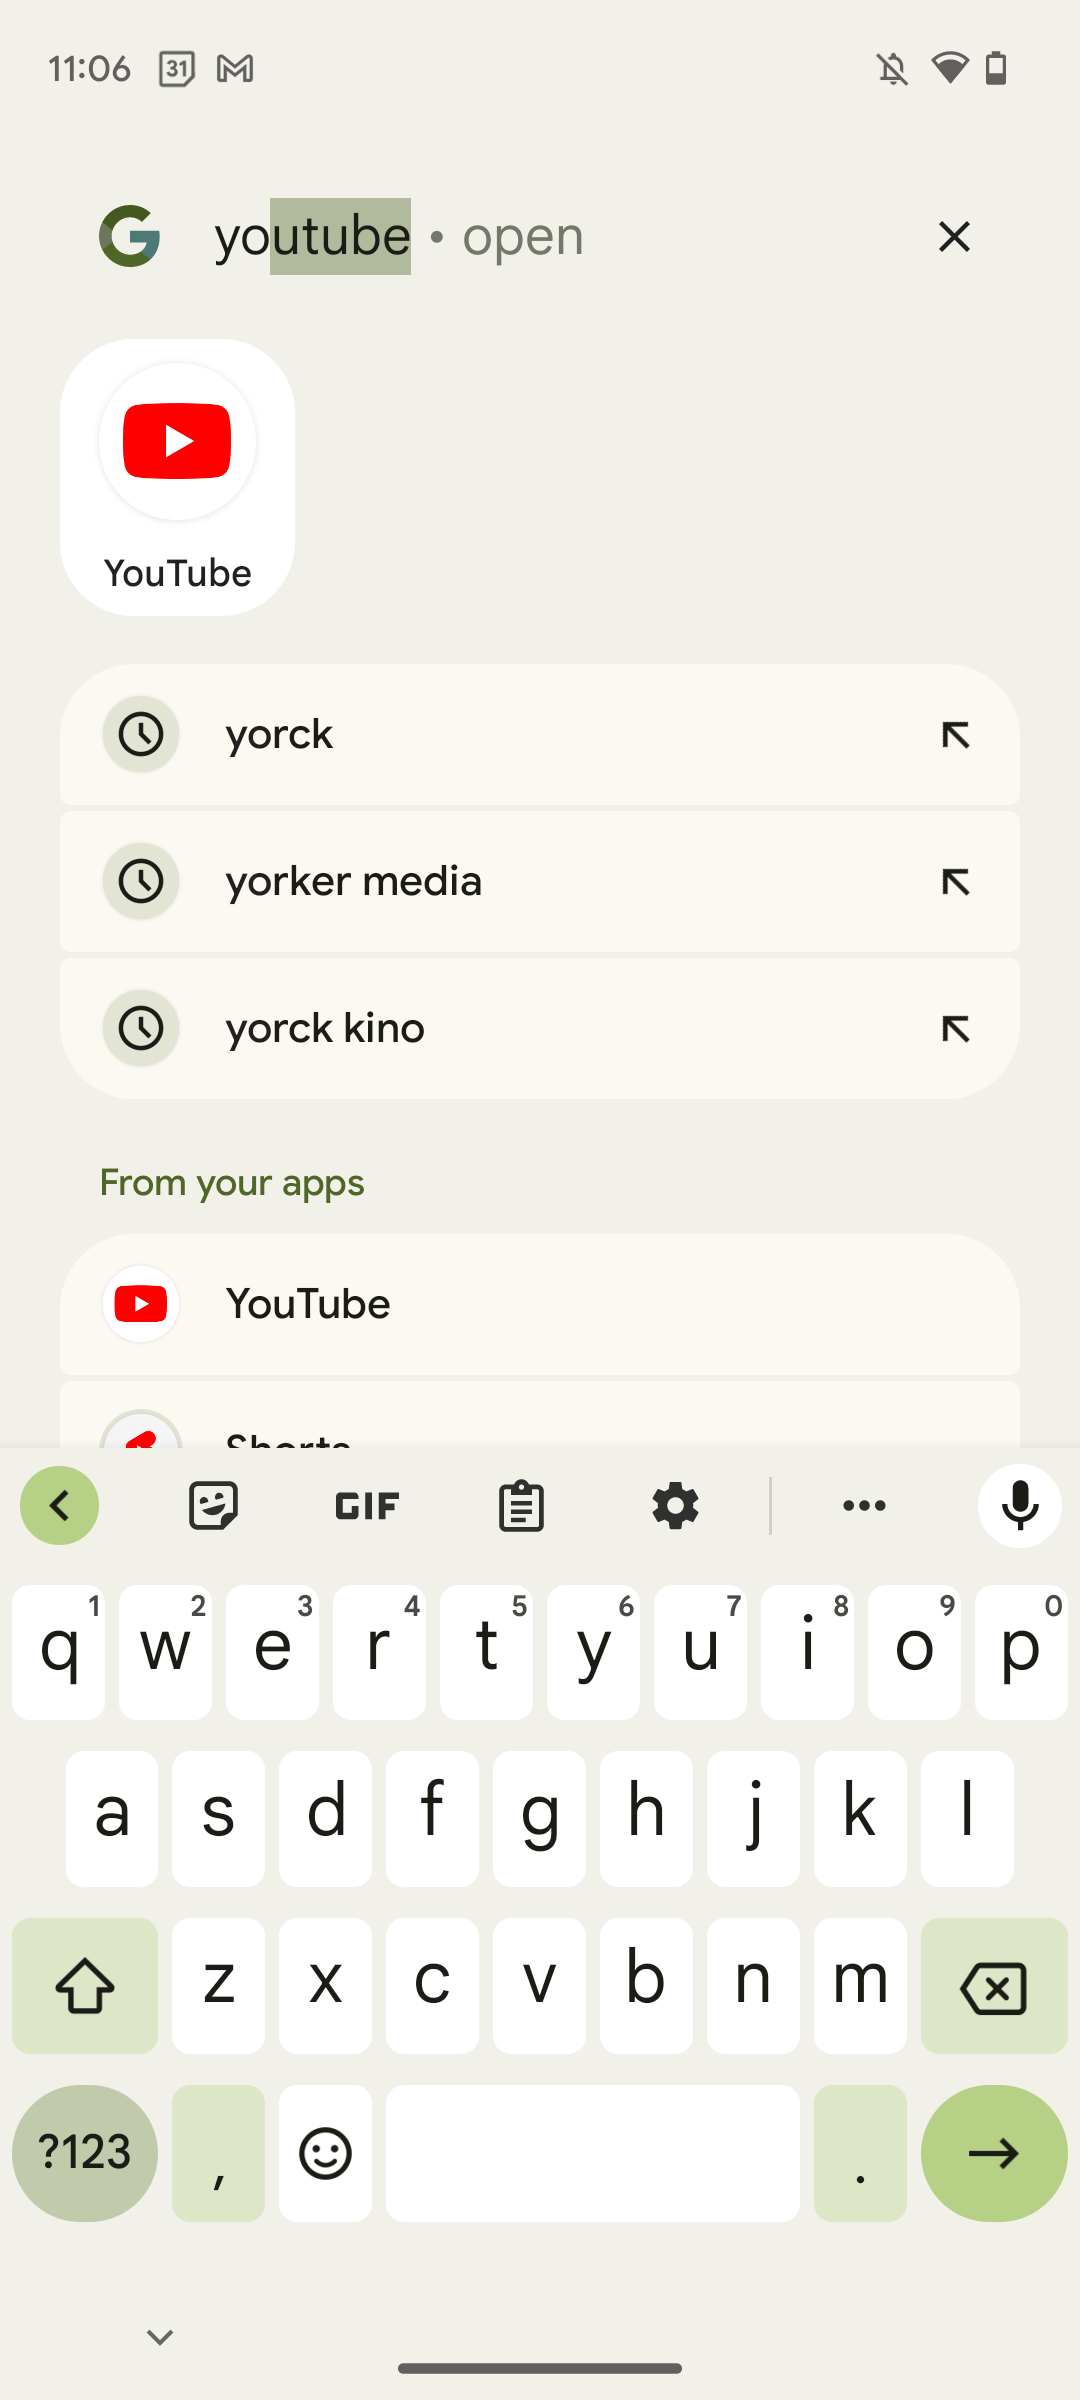 Screenshot of Google Pixel's launcher search showing how the first result (YouTube) is highlighted, which indicates that you can tap enter to start the app.